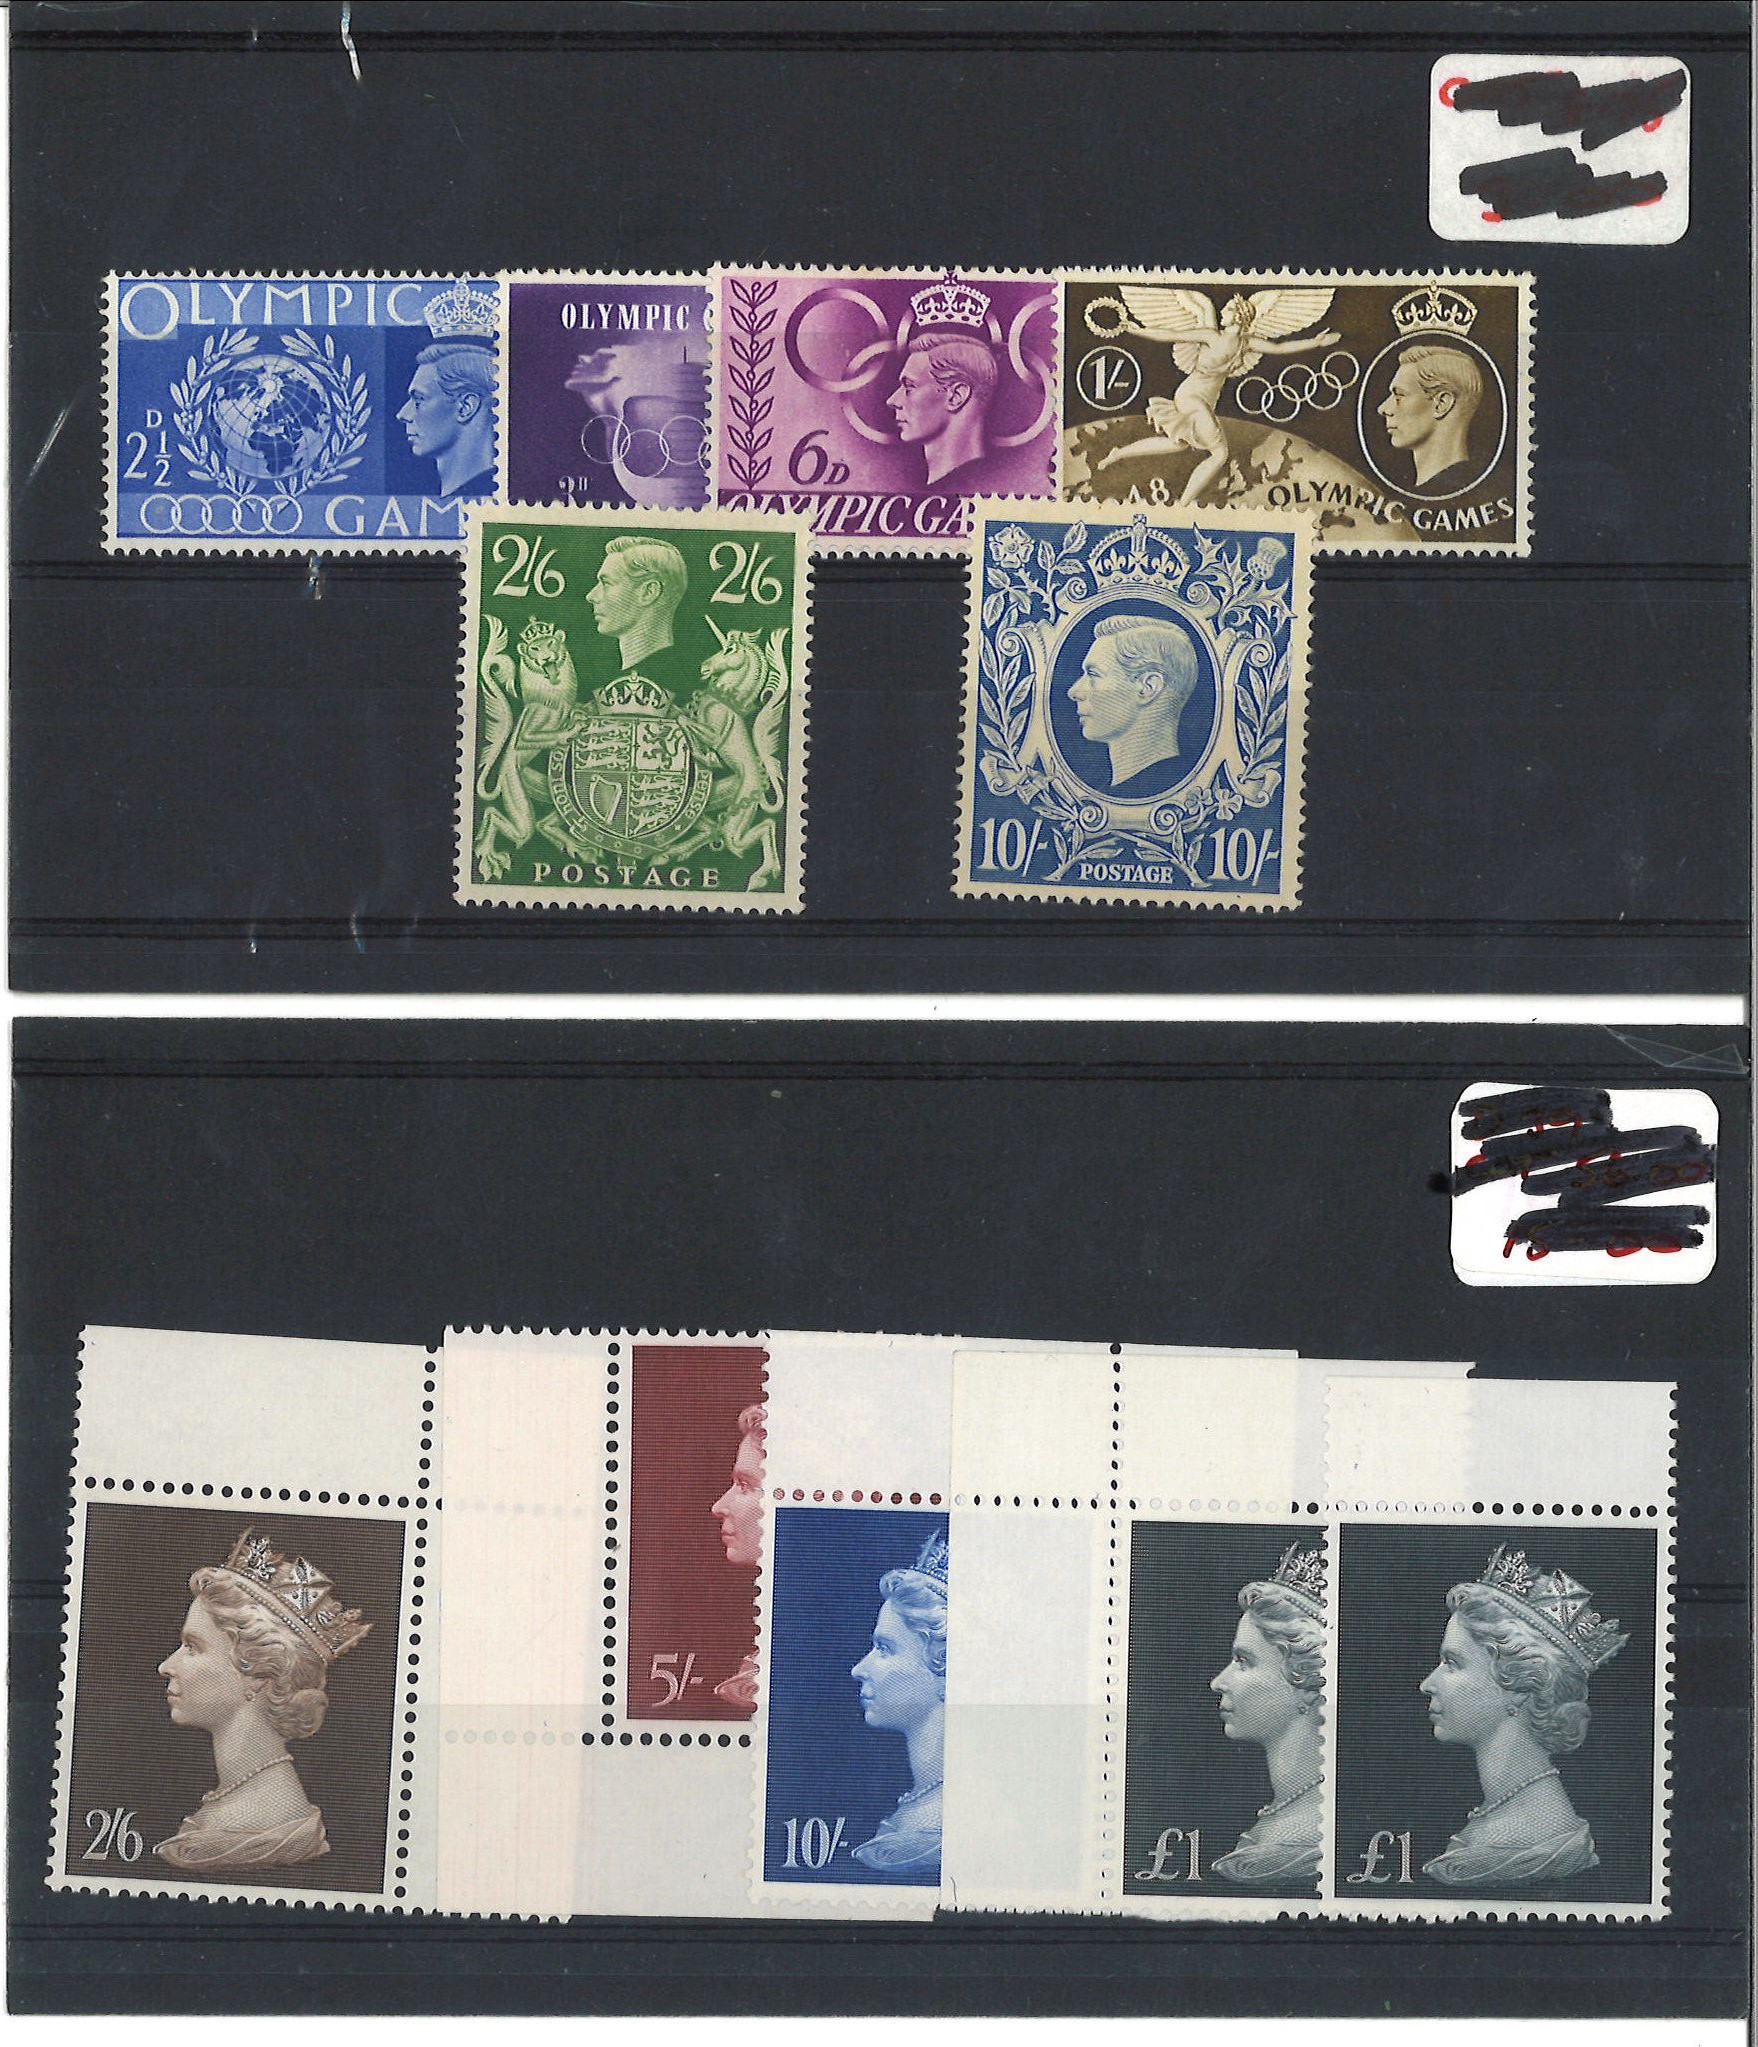 GB unmounted mint stamp collection. Includes 2/6d and 10/= 1939 Olympic Games set and QEII 2/6d